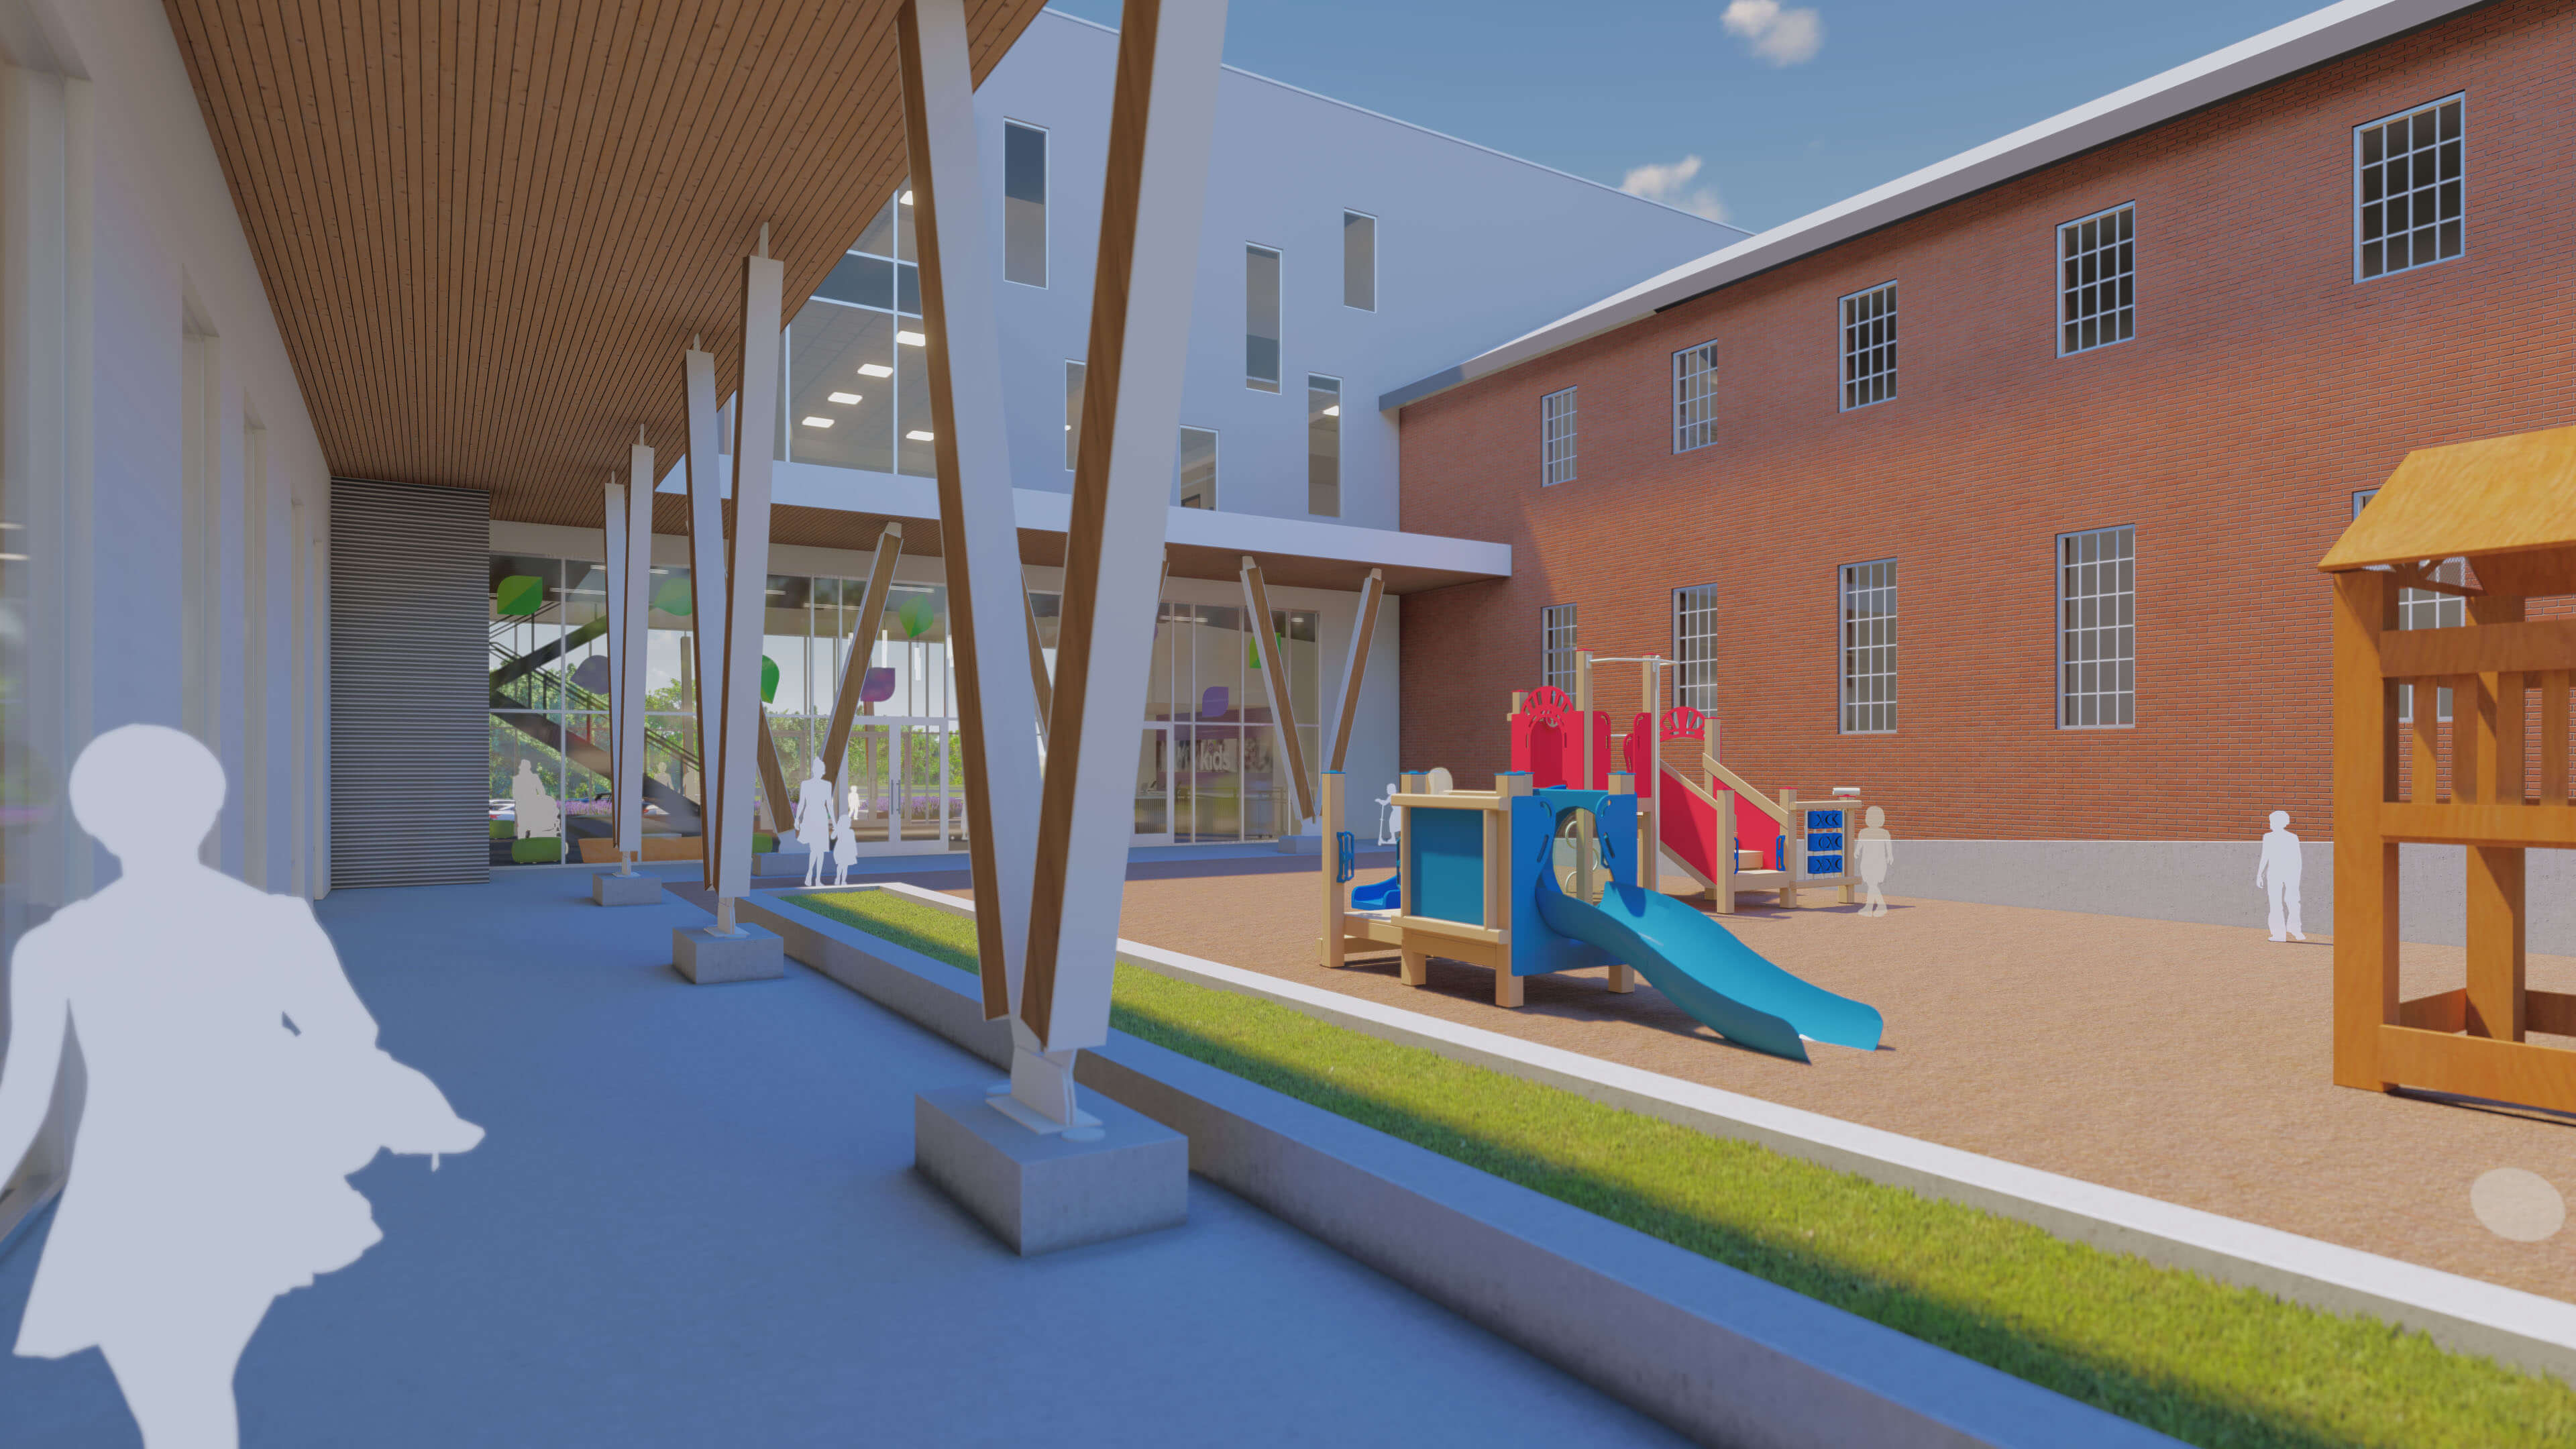 Concord Baptist Church - Primary Courtyard Playground Exterior Rendering